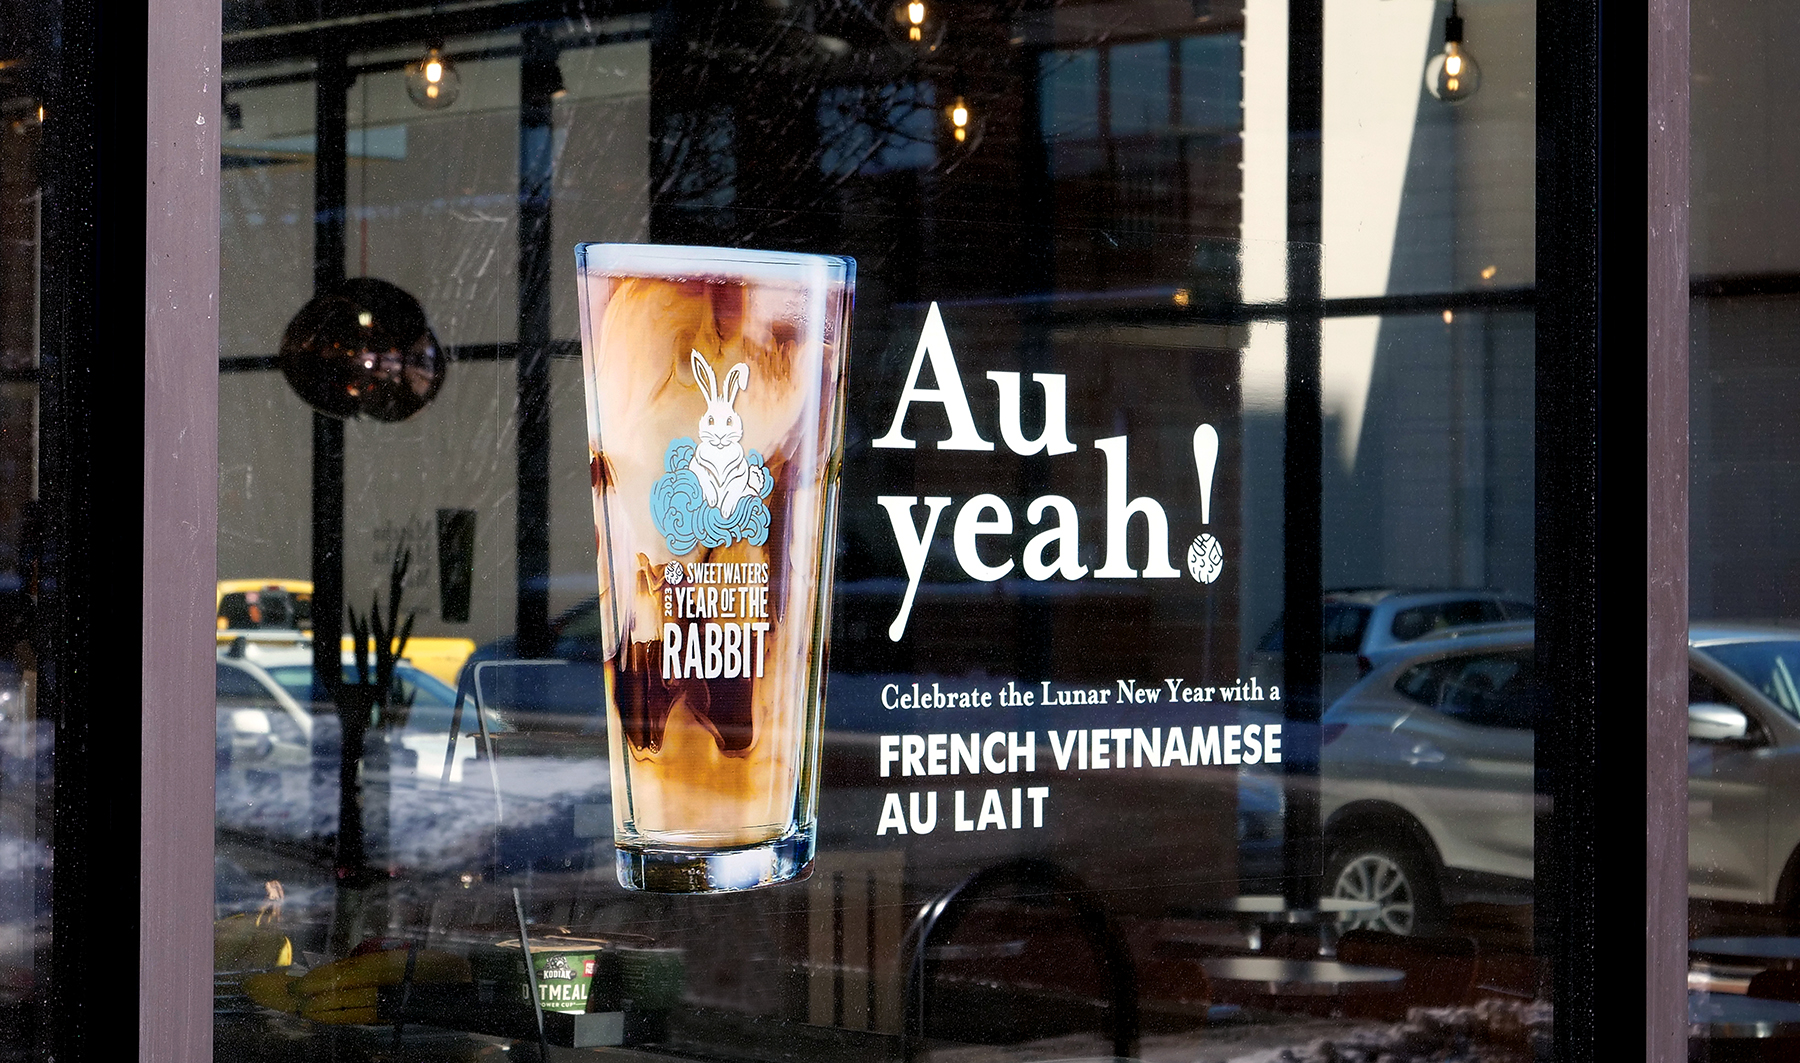 In-store window decal promoting the Year of the Rabbit and the French Vietnamese Au Lait drink with headline "Au yeah!"